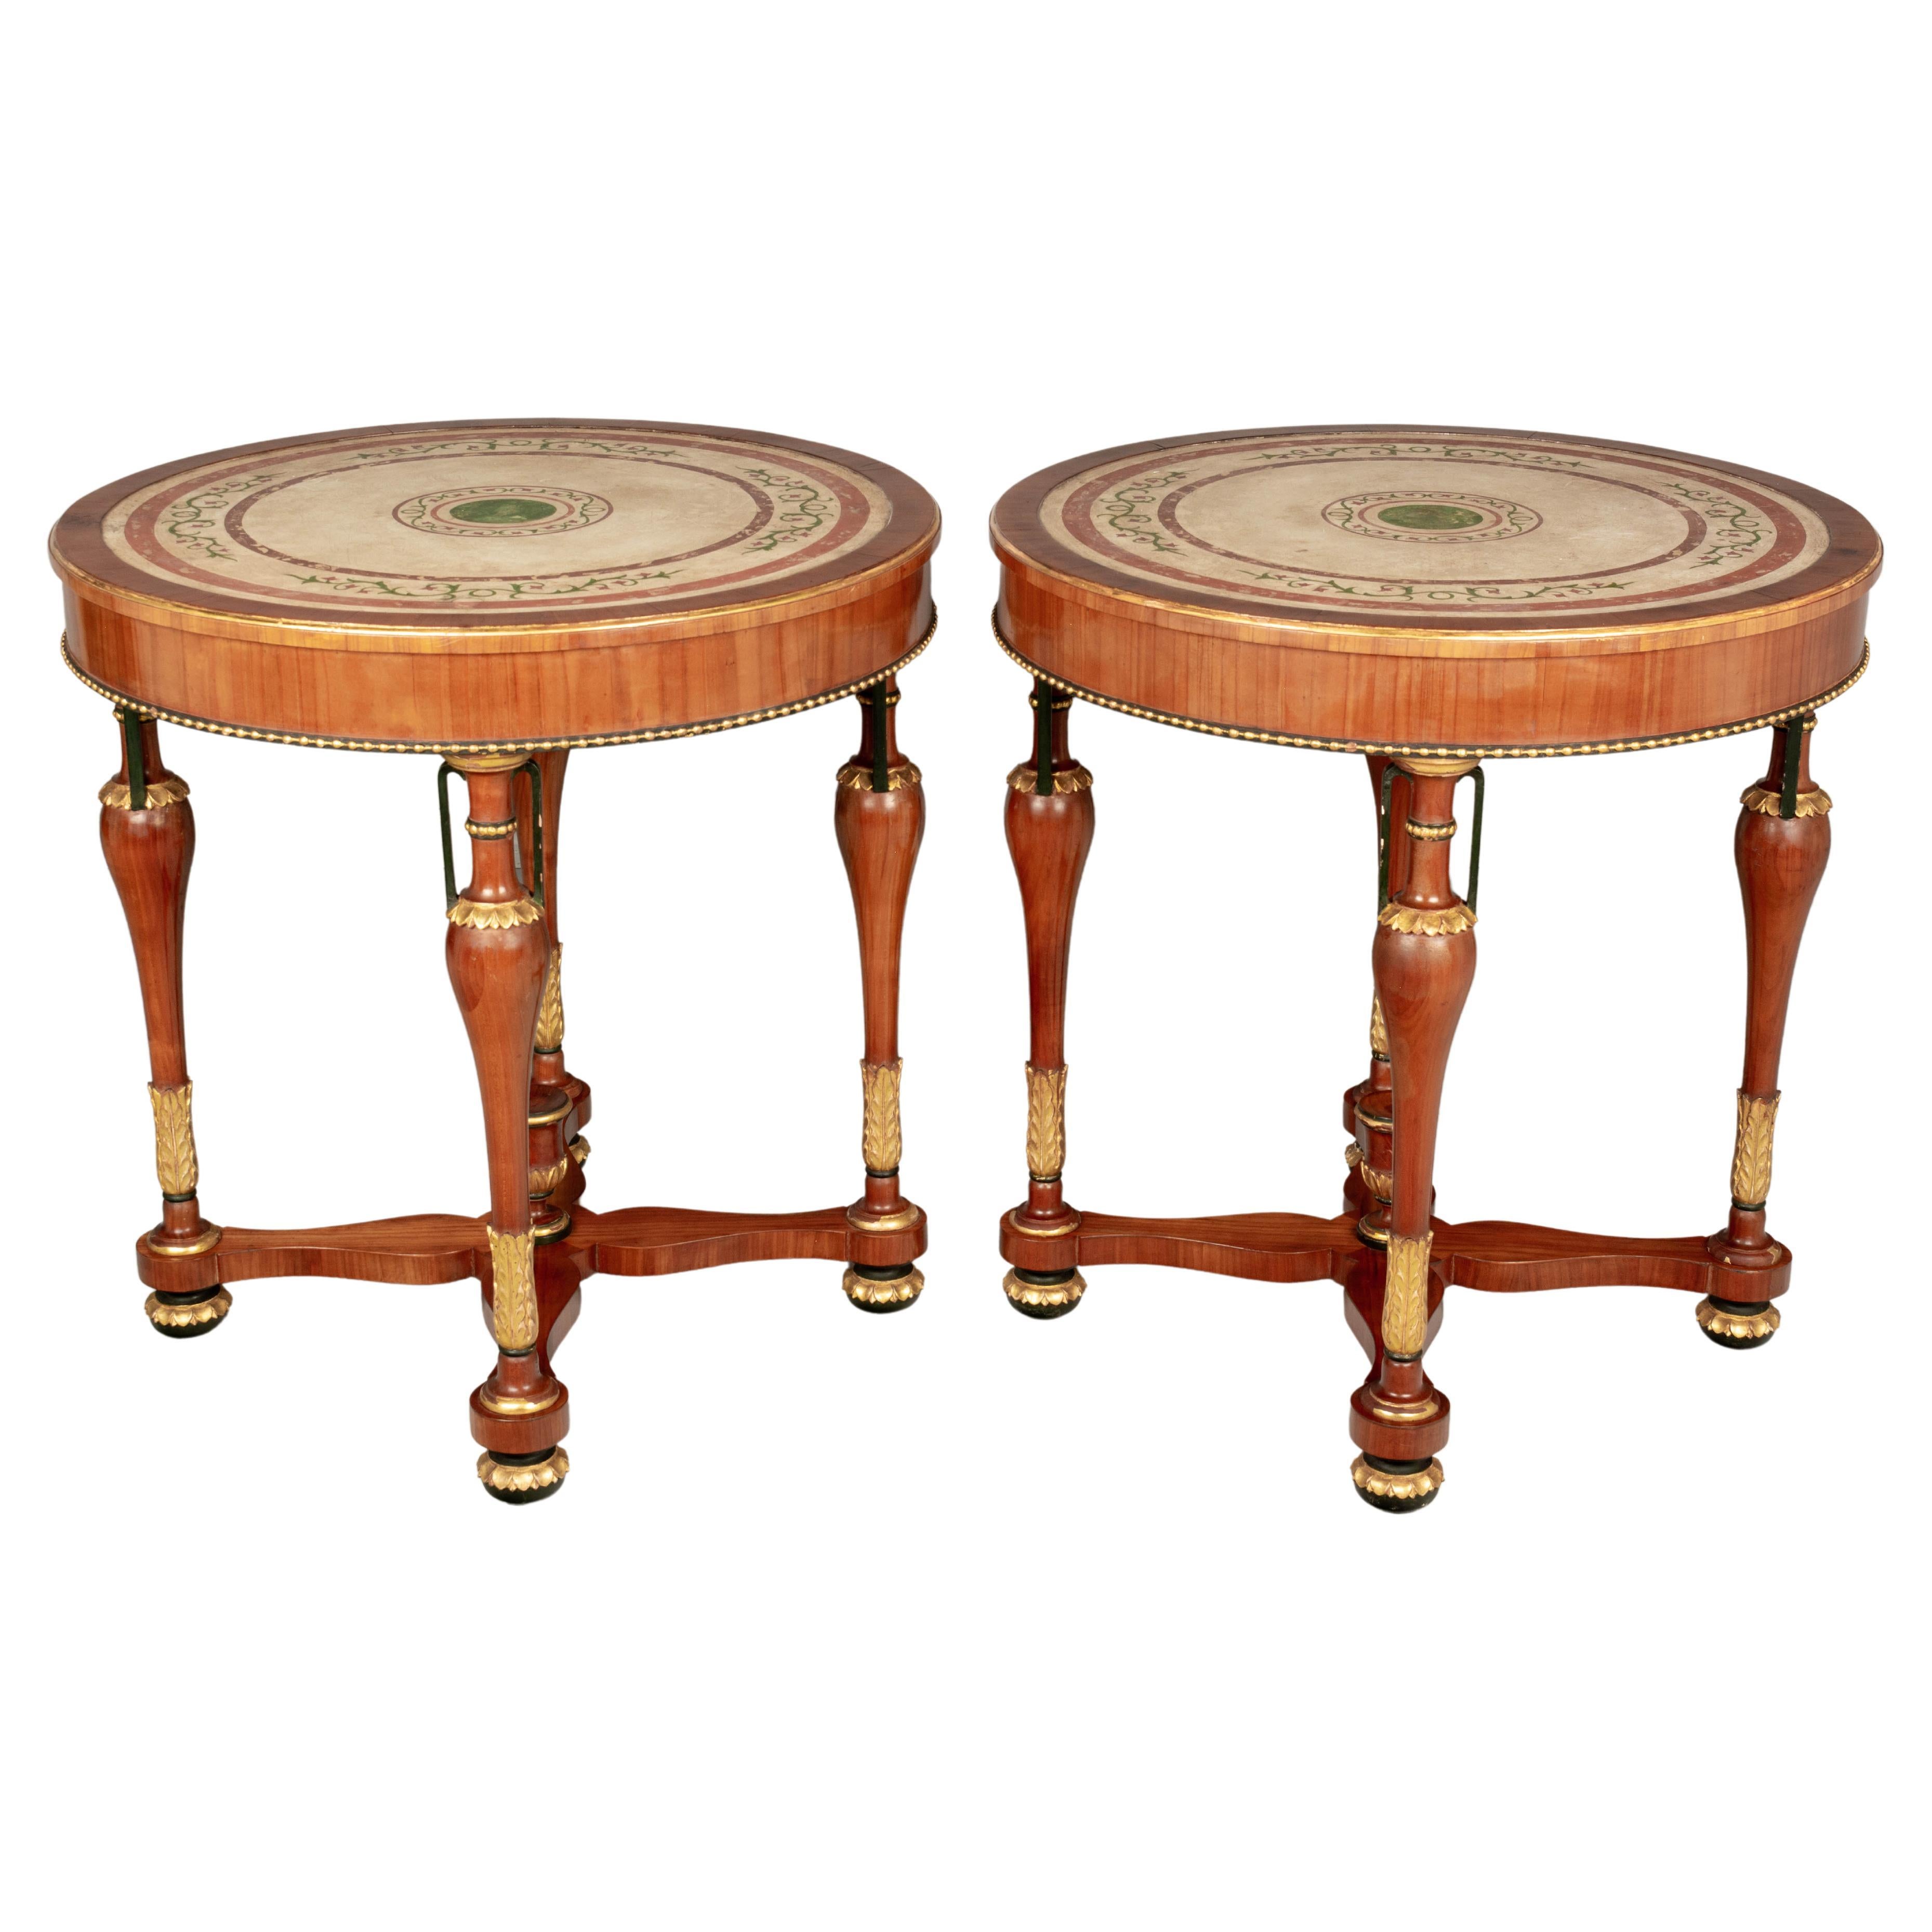 A pair of Italian Neoclassical circular center tables made of solid and veneer of cherry. The tops are scagliola, a hand-painted plaster technique that resembles inlays in marble. Elegant turned legs with urn forms and gilded foliate decoration with